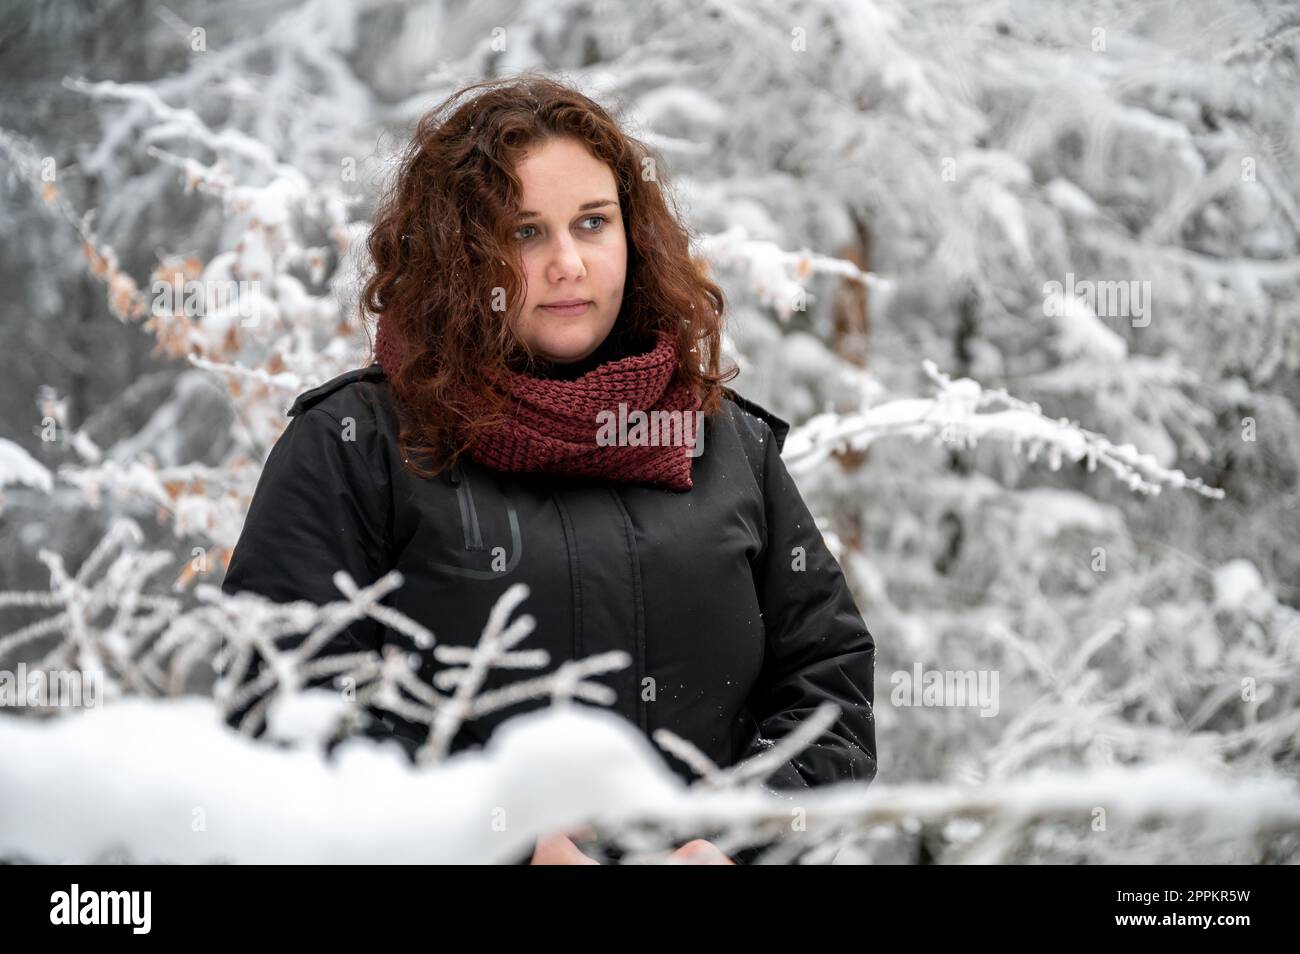 Young woman with brown curly hair and thoughtful facial expression is standing in the middle of a snowy forest during winter Stock Photo